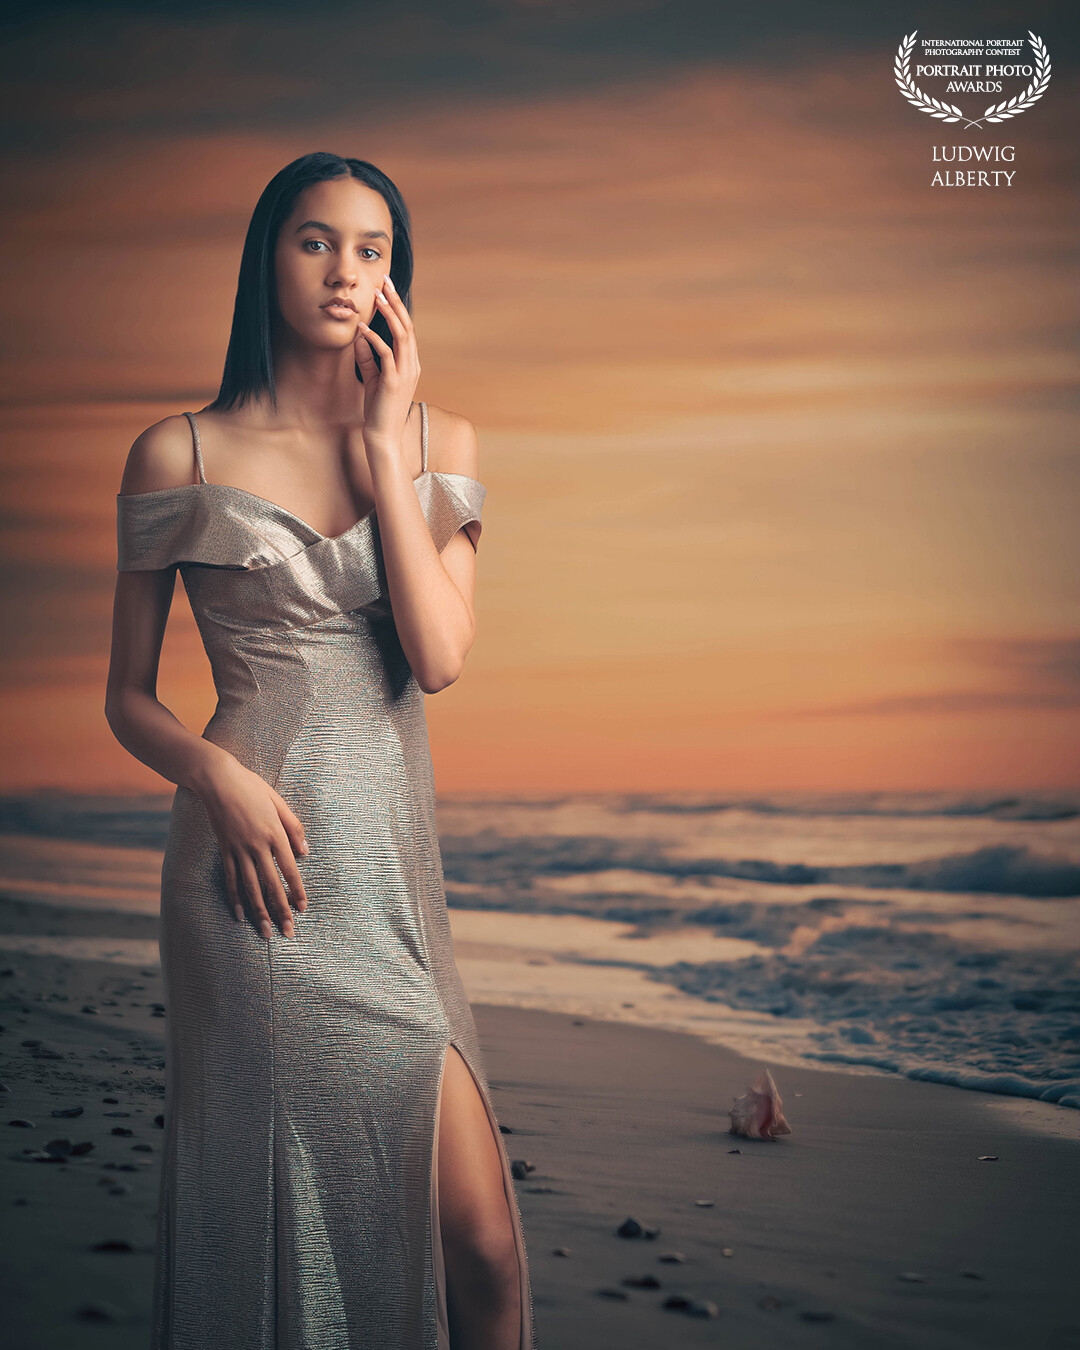 This is a composite of a photo I took on my studio, I thought this subtle pose mix well with the sunset beach background.